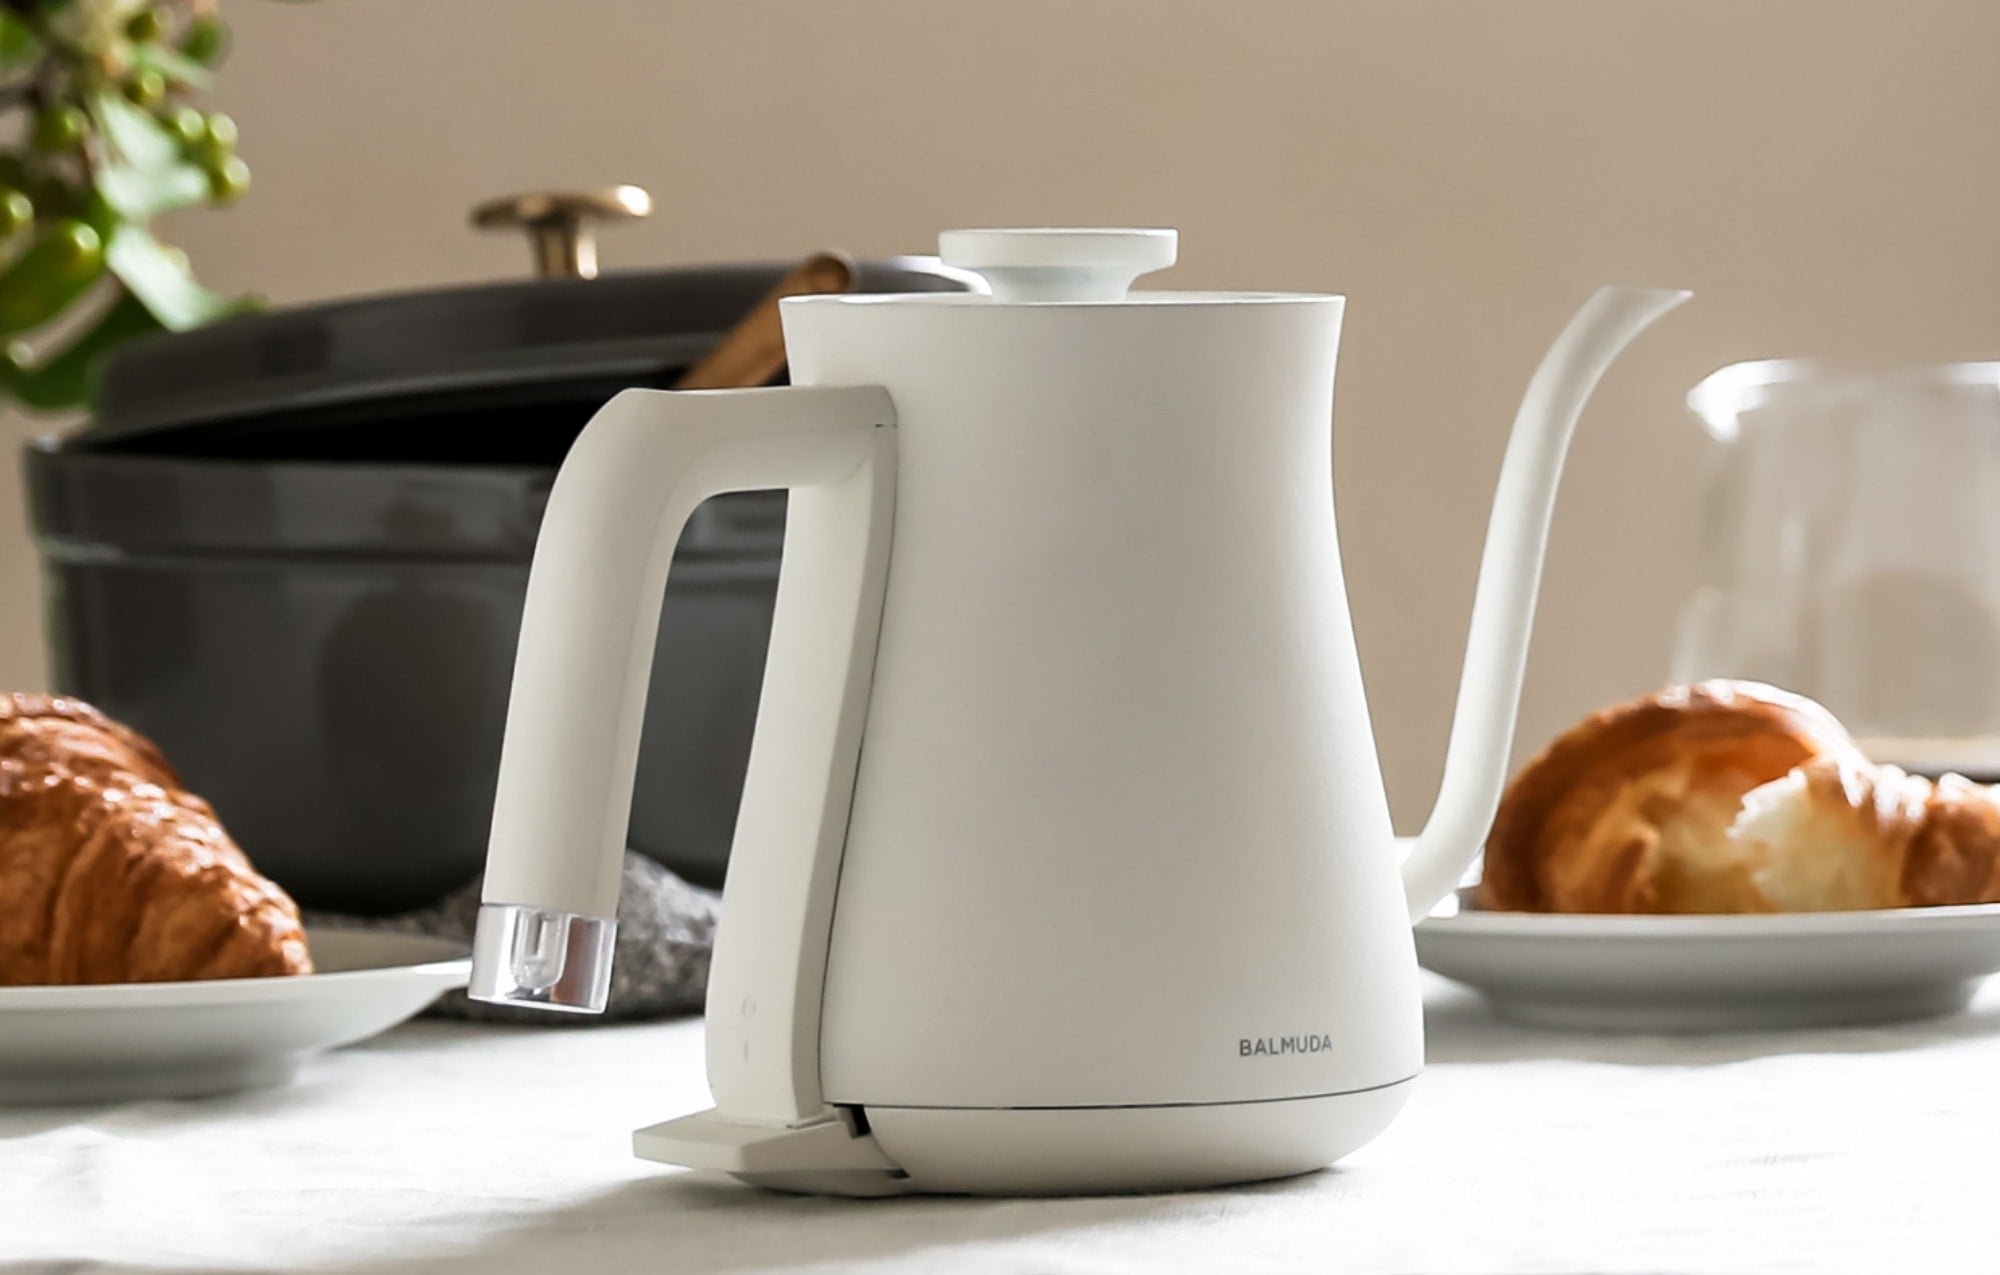 Balmuda Electric Kettle BALMUDA The Pot K02A-WH (White) from Japan - New